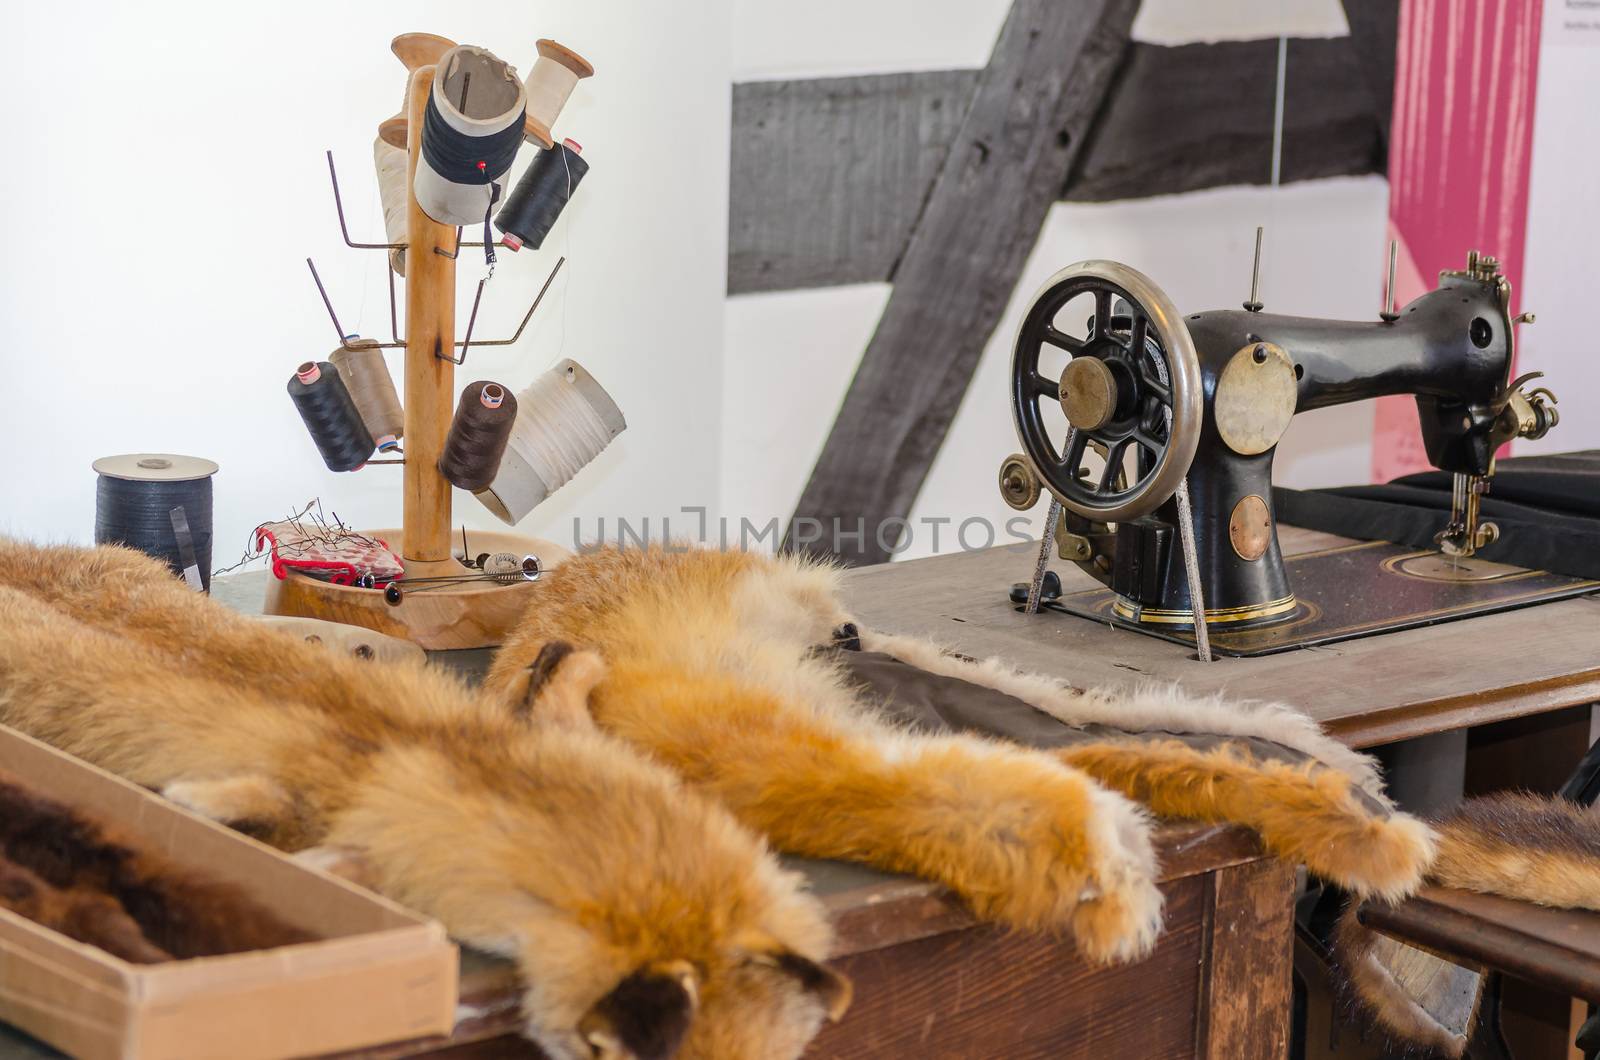 View of an old sewing in a sewing factory. With an antique sewing machine and accessories.